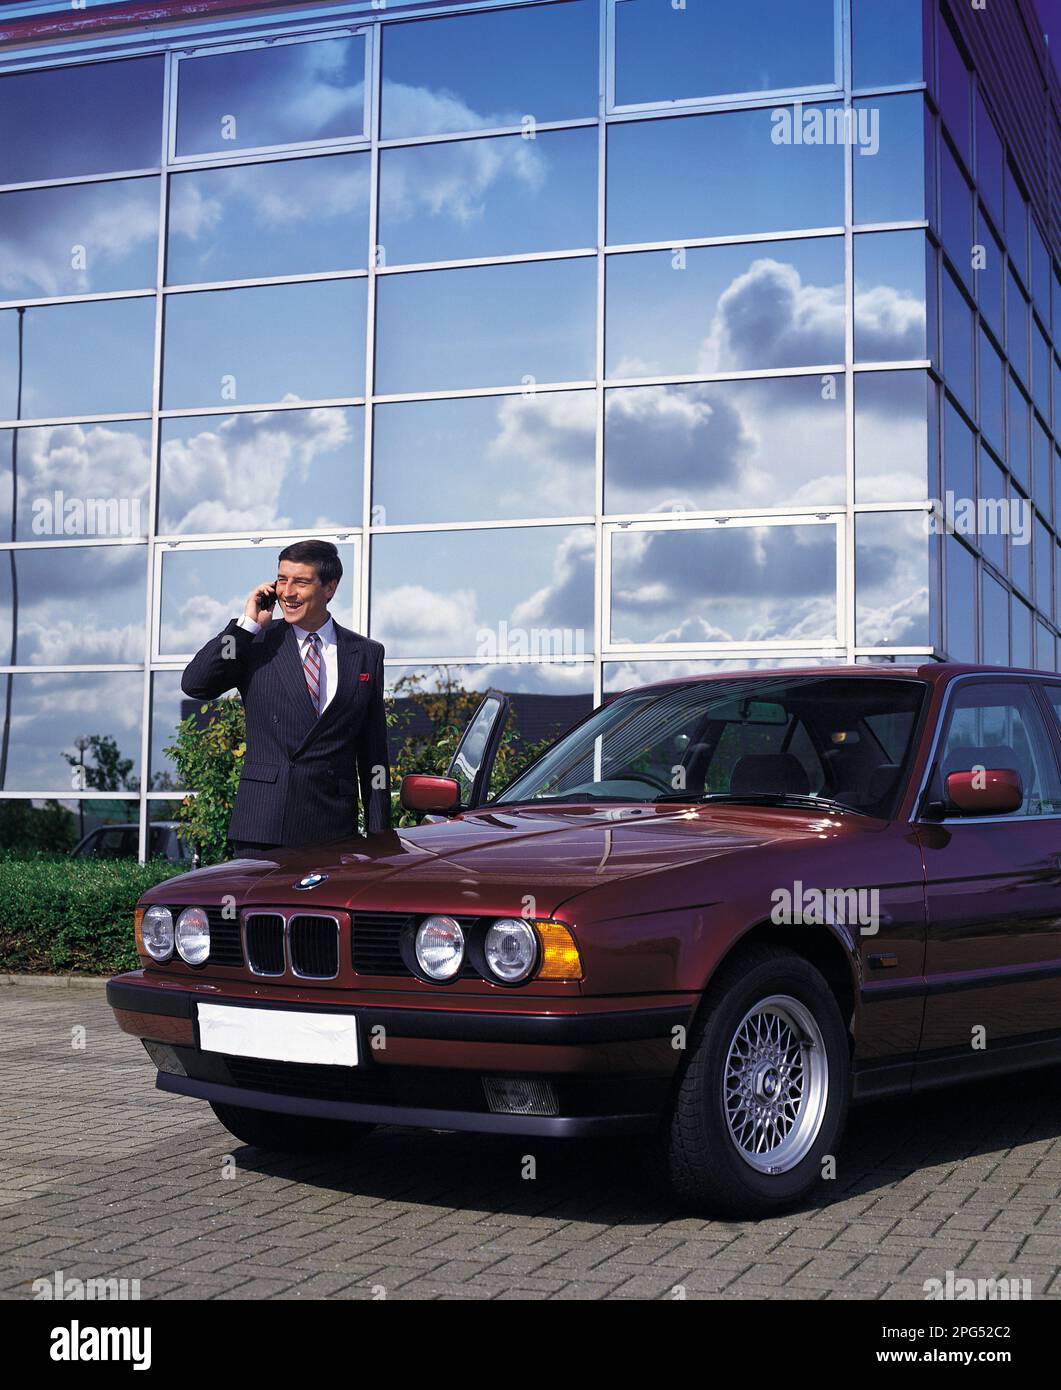 Businessman with cell phone standing by a vintage BMW car outside office building. Stock Photo